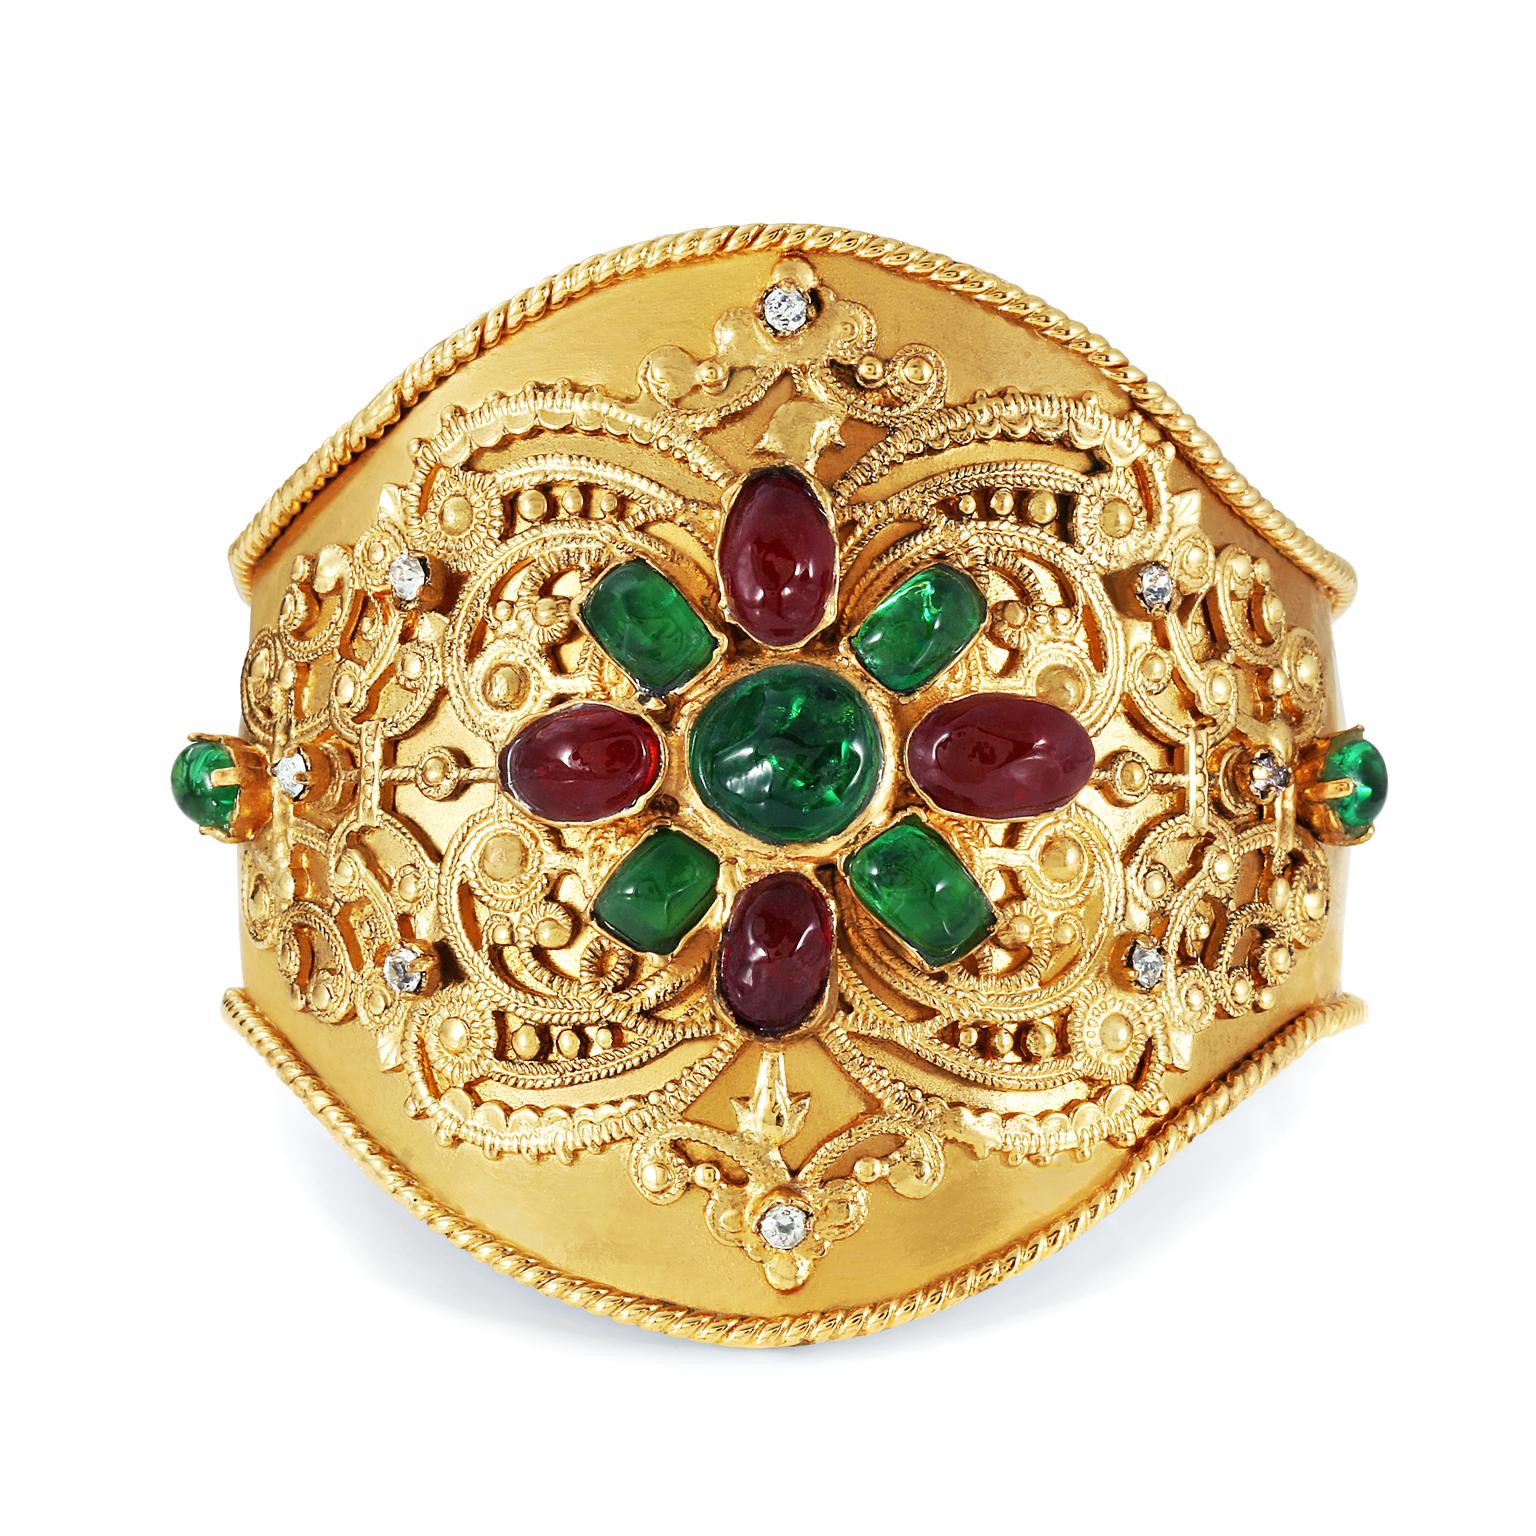 This authentic Chanel Gold Gripoix Cuff is in excellent vintage condition form the 1970’s.  Very rare and collectible, it features dark red and green Gripoix stones in a floral design on an ornately detailed gold cuff.  Made in France.
